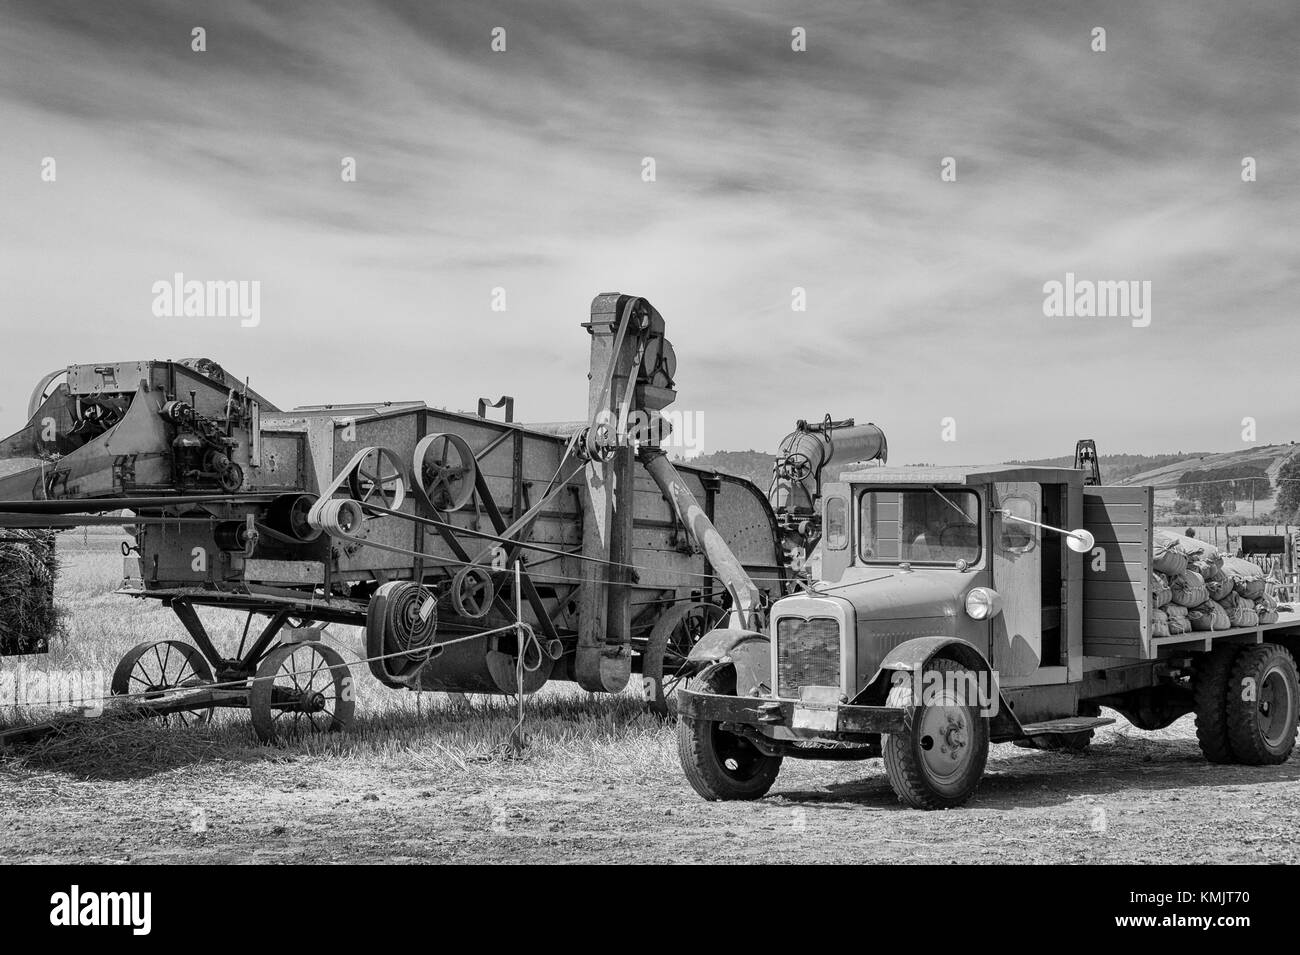 McMinnville, Oregon, USA - August 13, 2016:  Black and white of an old flat bed truck parked by an old grain harvester. Stock Photo